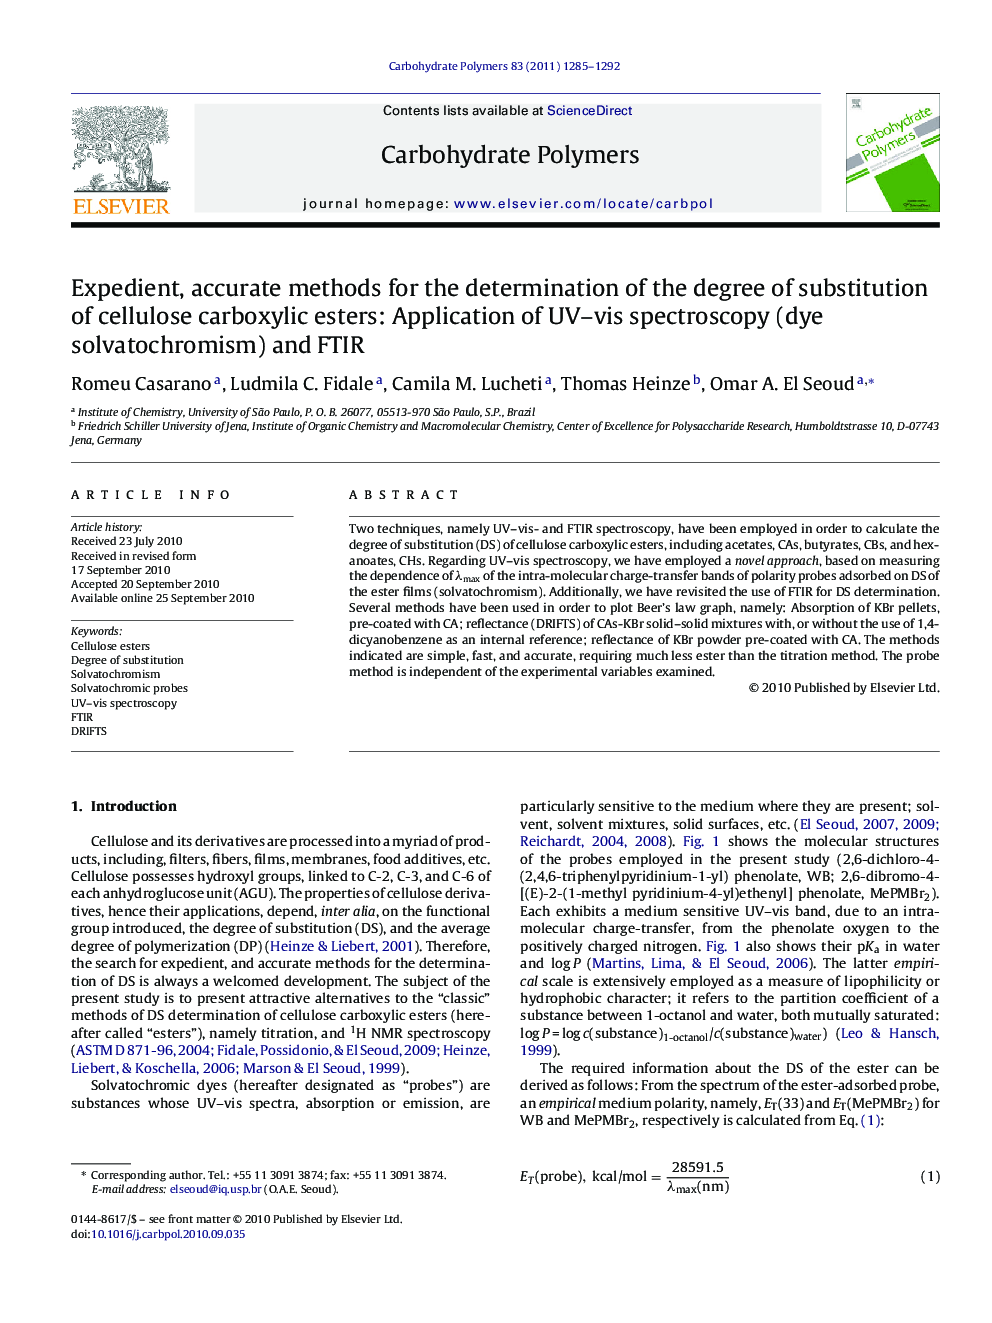 Expedient, accurate methods for the determination of the degree of substitution of cellulose carboxylic esters: Application of UV–vis spectroscopy (dye solvatochromism) and FTIR